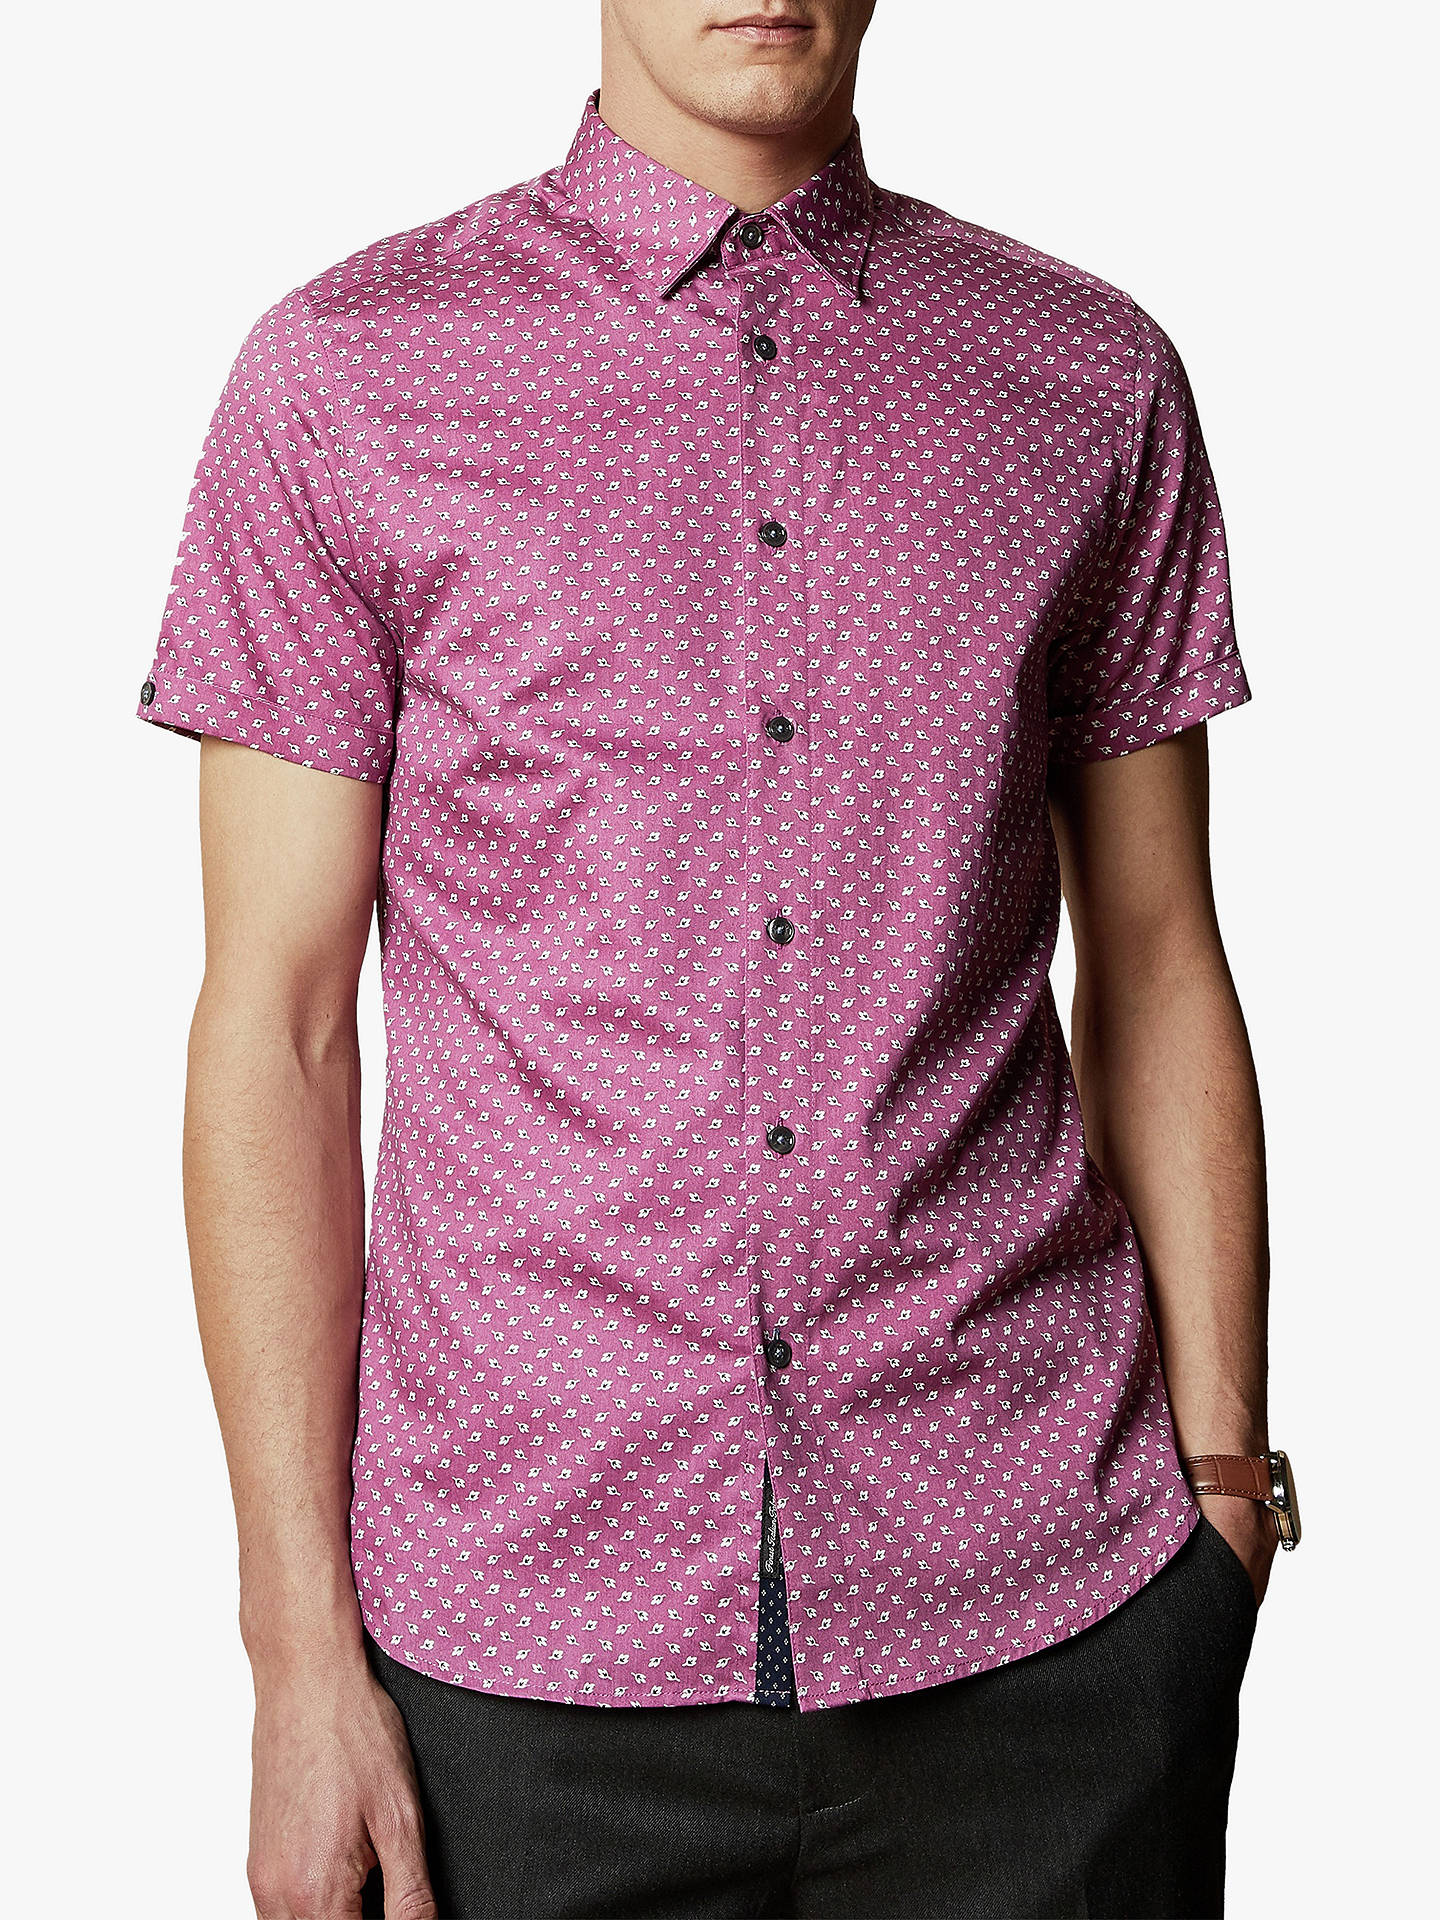 Ted Baker Weare Cotton Short Sleeve Floral Shirt at John Lewis & Partners